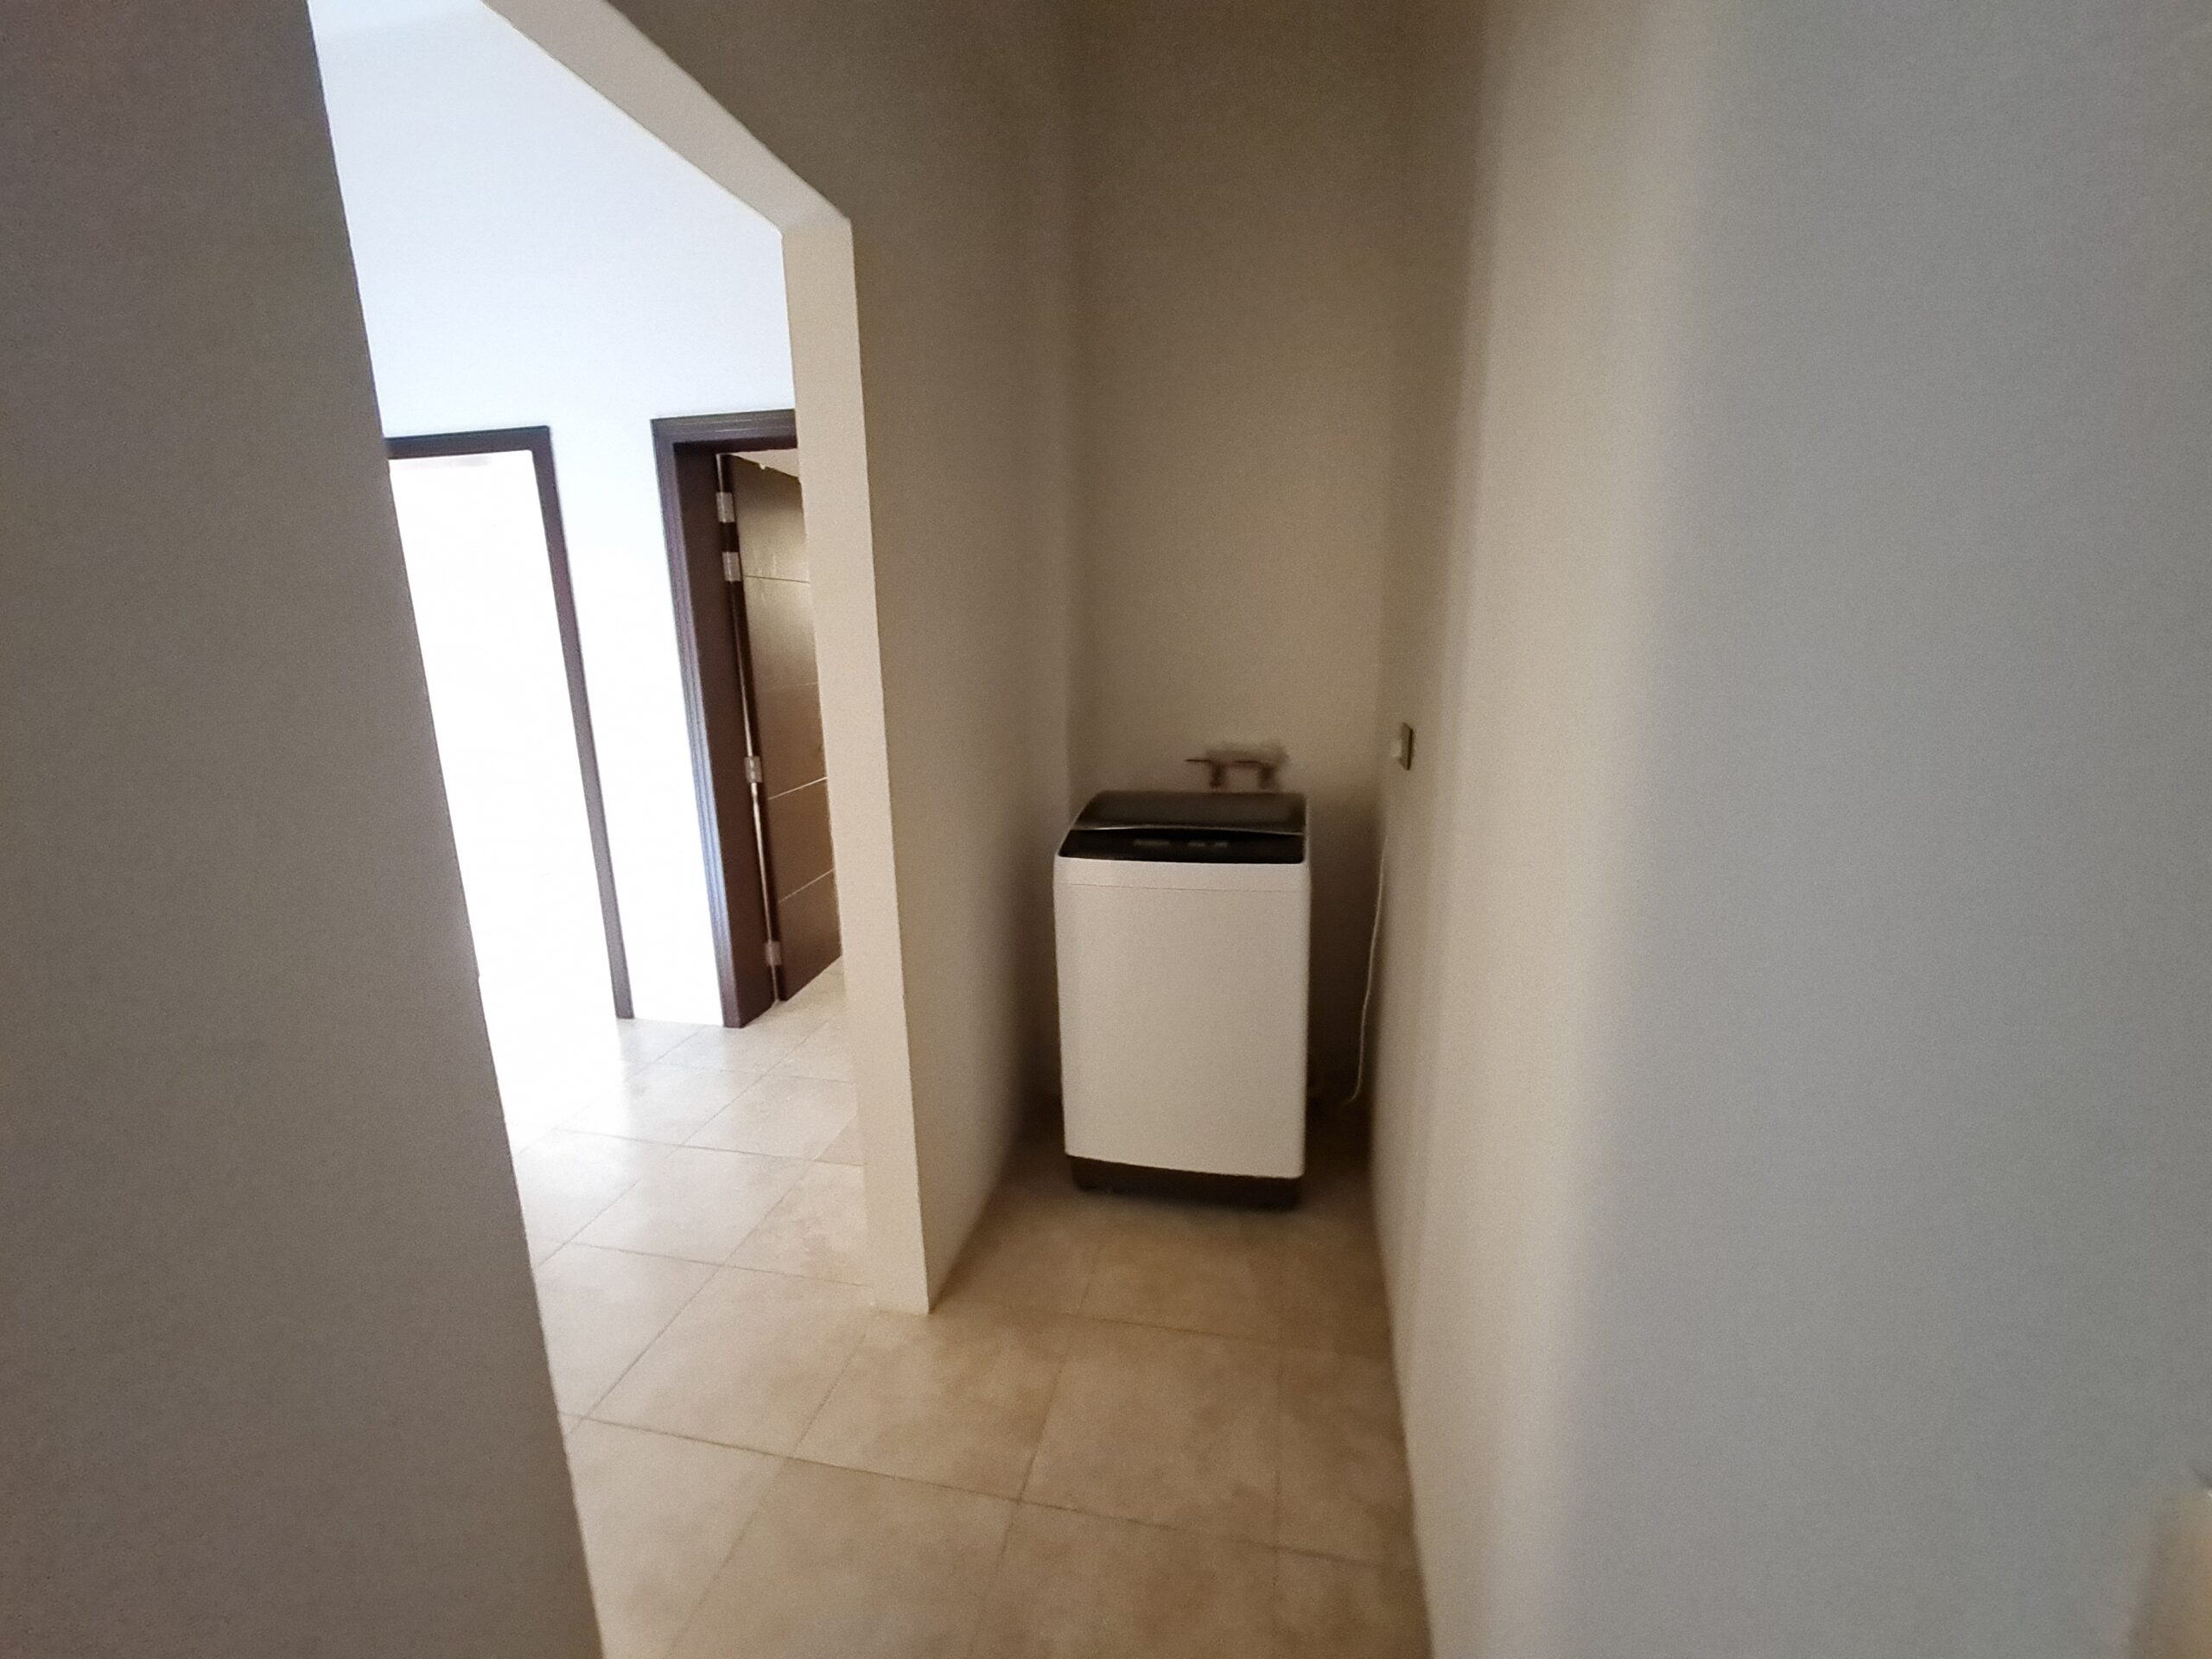 Luxury apartment for rent semi-furnished located in Zinj